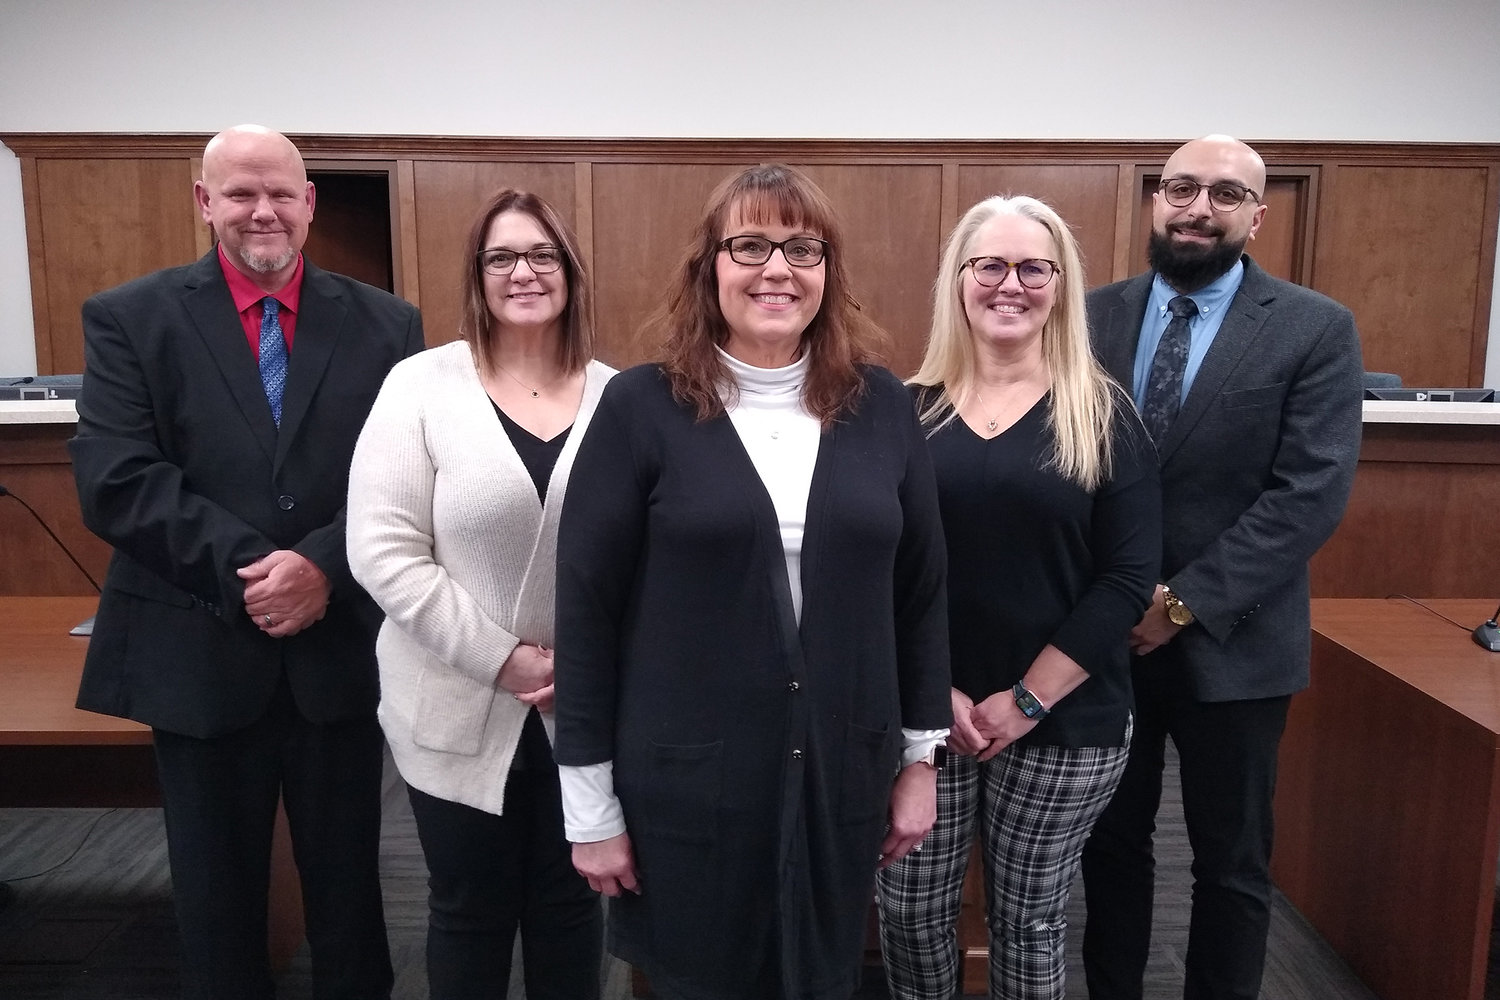 NEW ALDERMAN — Kim Arbuthnot, center, was appointed Jan. 26 to fill a vacancy on the Wright City Board of Aldermen. She is running unopposed for election to a full, two-year term. Pictured with her, from left, are Aldermen Don Andrews and Karey Owens, Mayor Michelle Heiliger, and Alderman Ramiz Hakim.